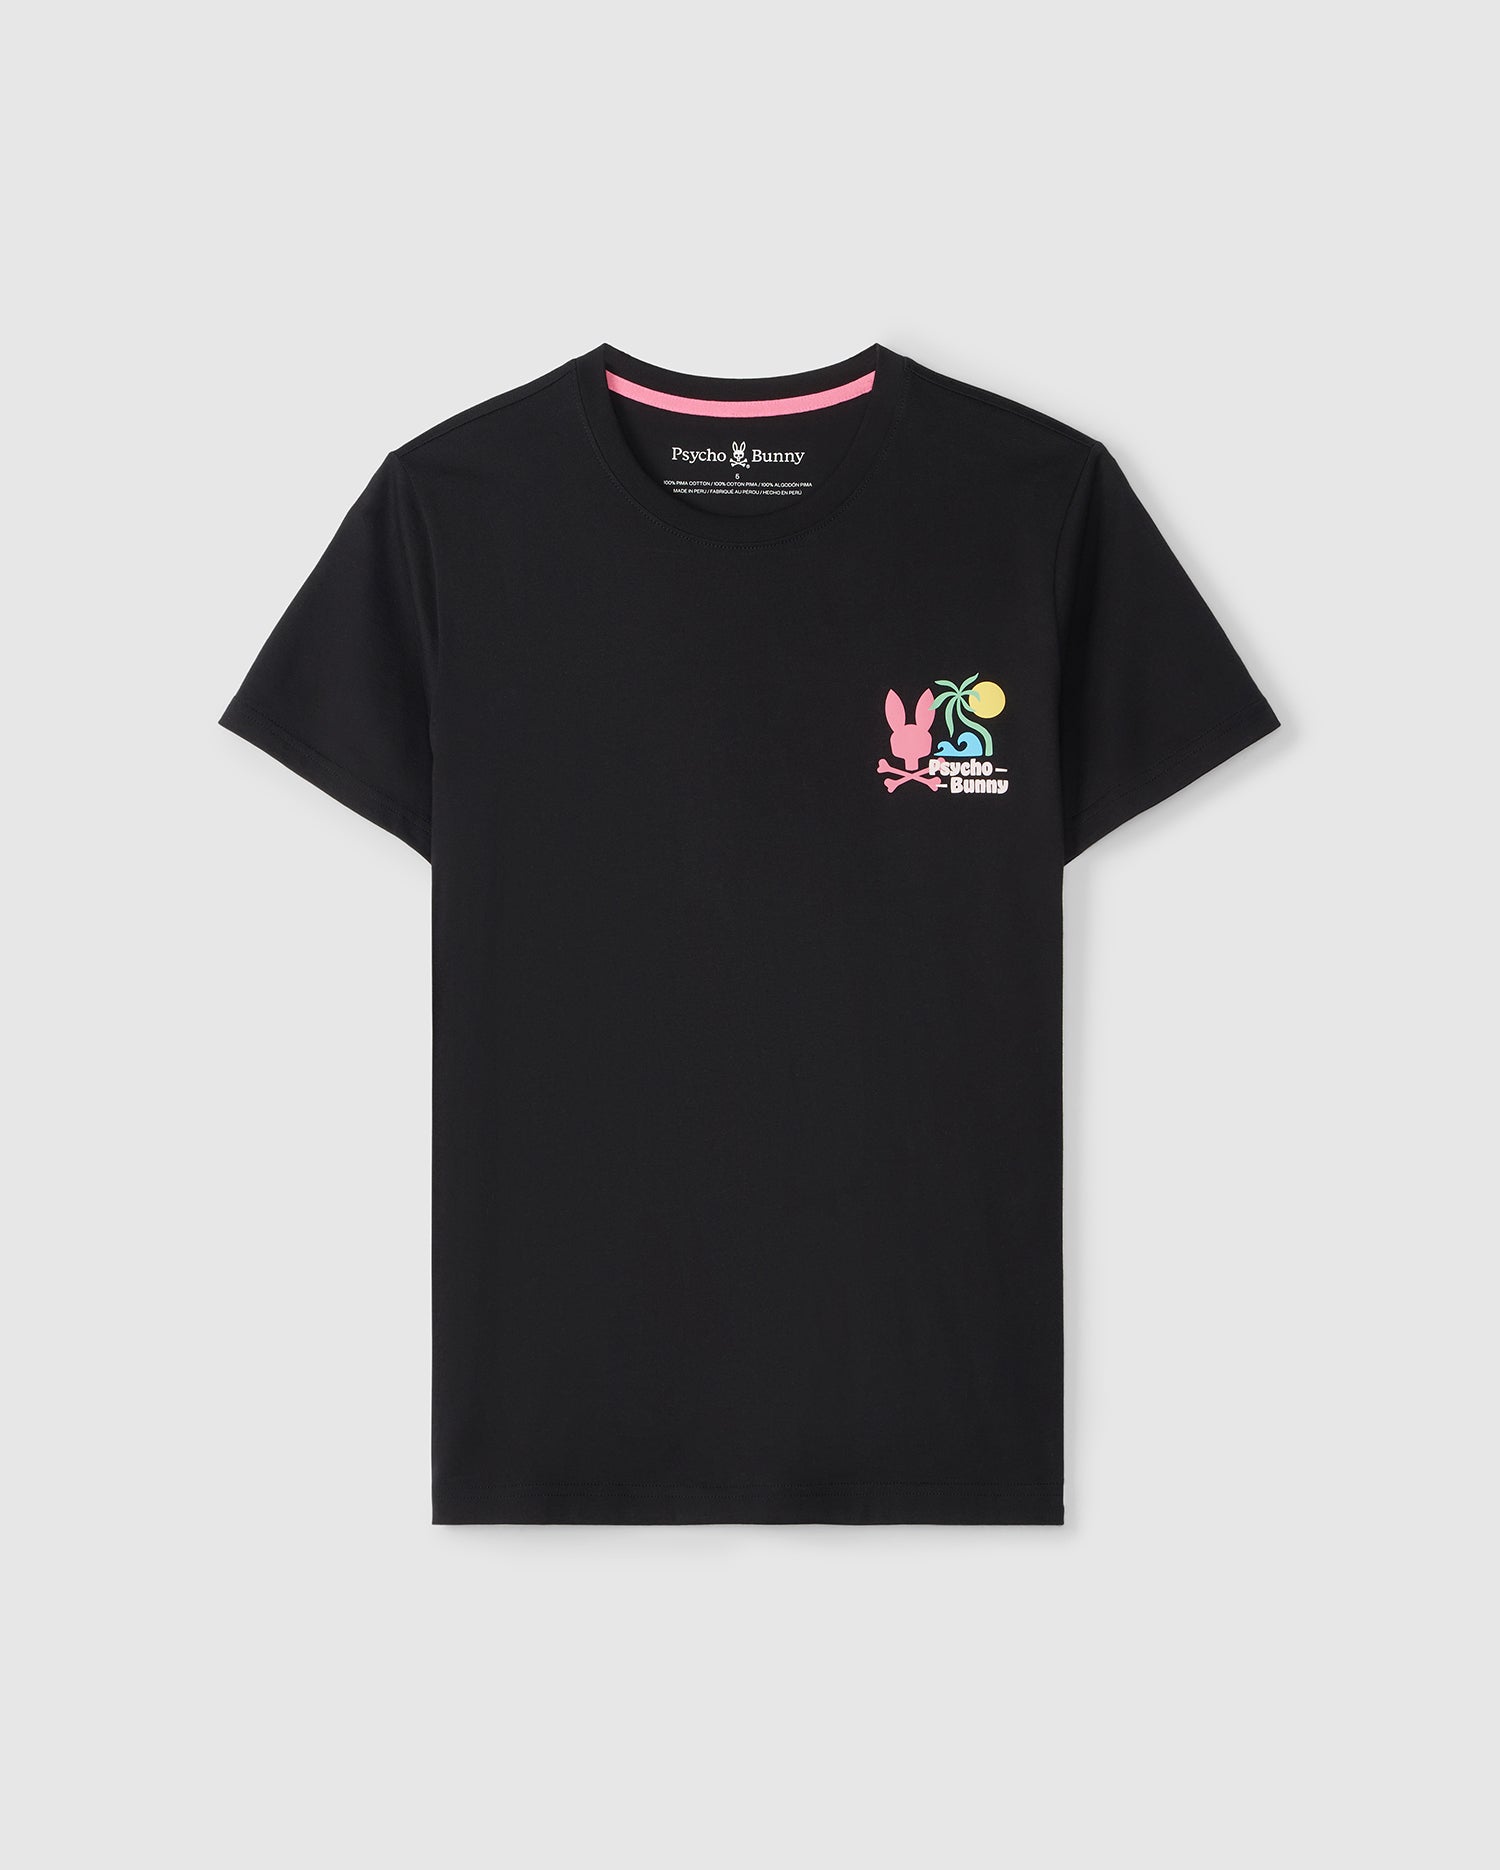 A black MENS MENTZ GRAPHIC TEE - B6U395B200 made from Peruvian Pima cotton, featuring a small, colorful tropical-inspired logo on the upper left chest. The graphic includes a pink rabbit, a person playing soccer, and a sun, accompanied by the text 